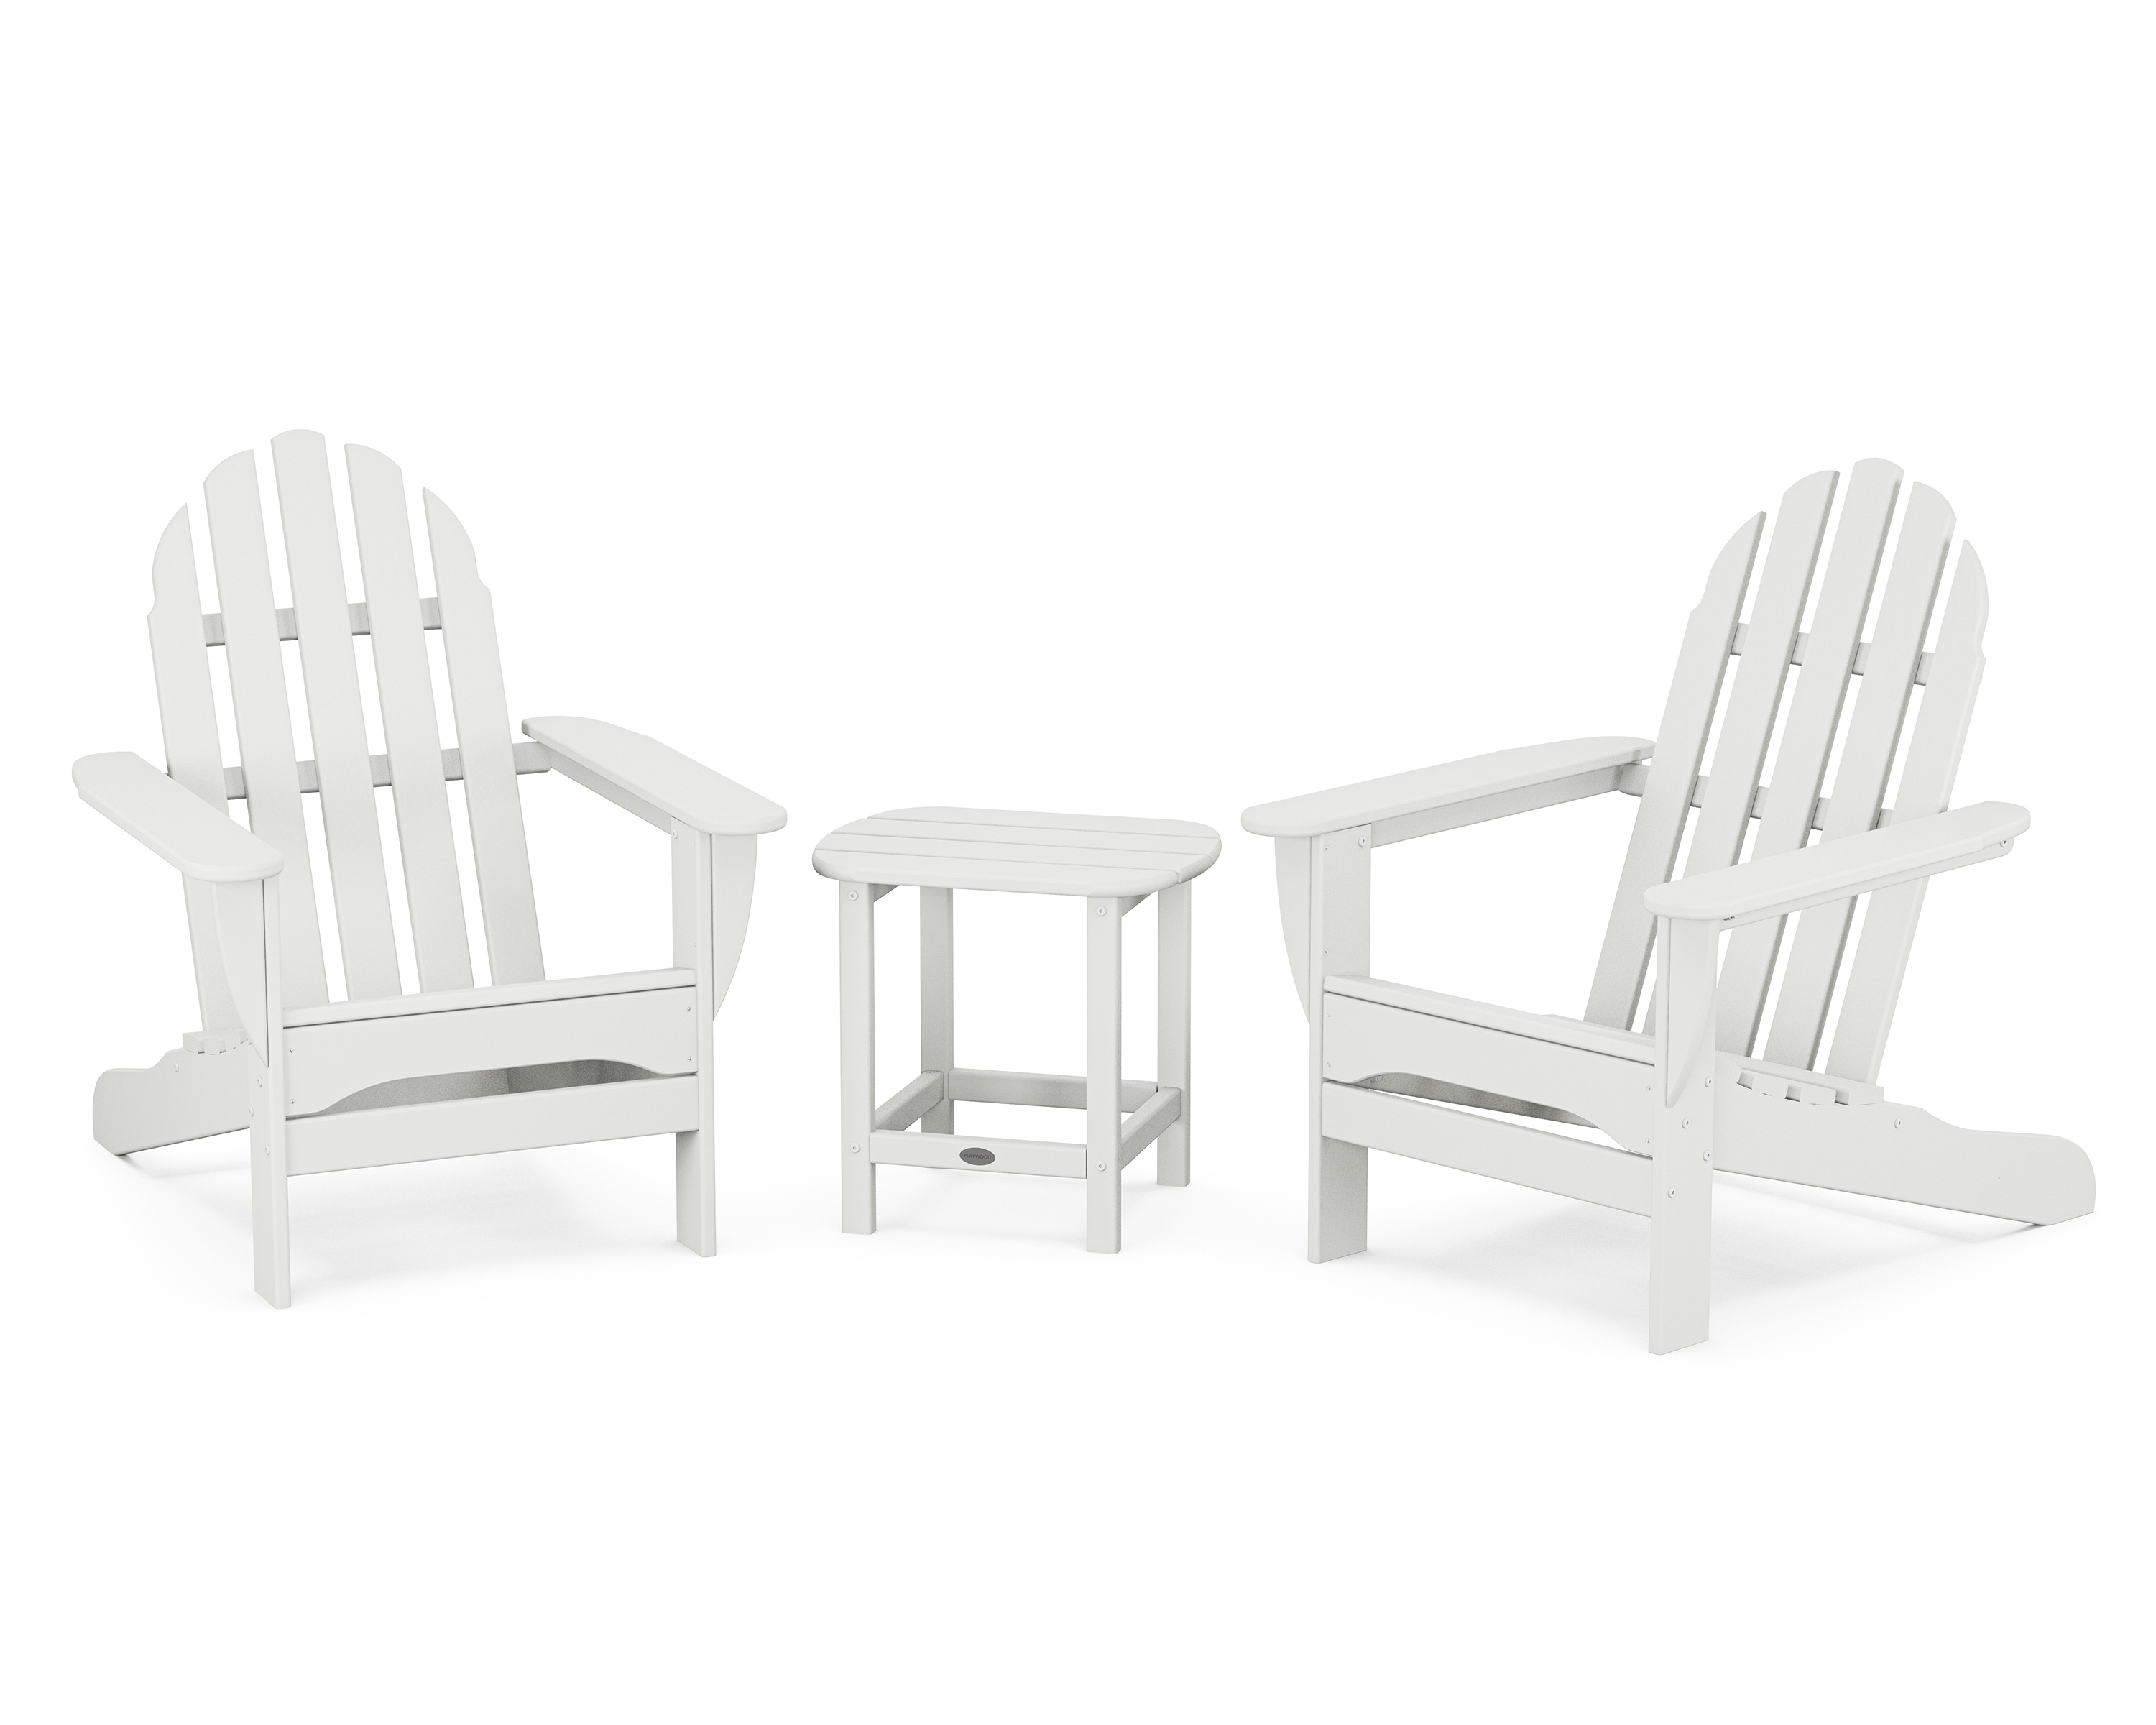 POLYWOOD Classic Adirondack 3-Piece Set with South Beach 18" Side Table in White - image 1 of 5